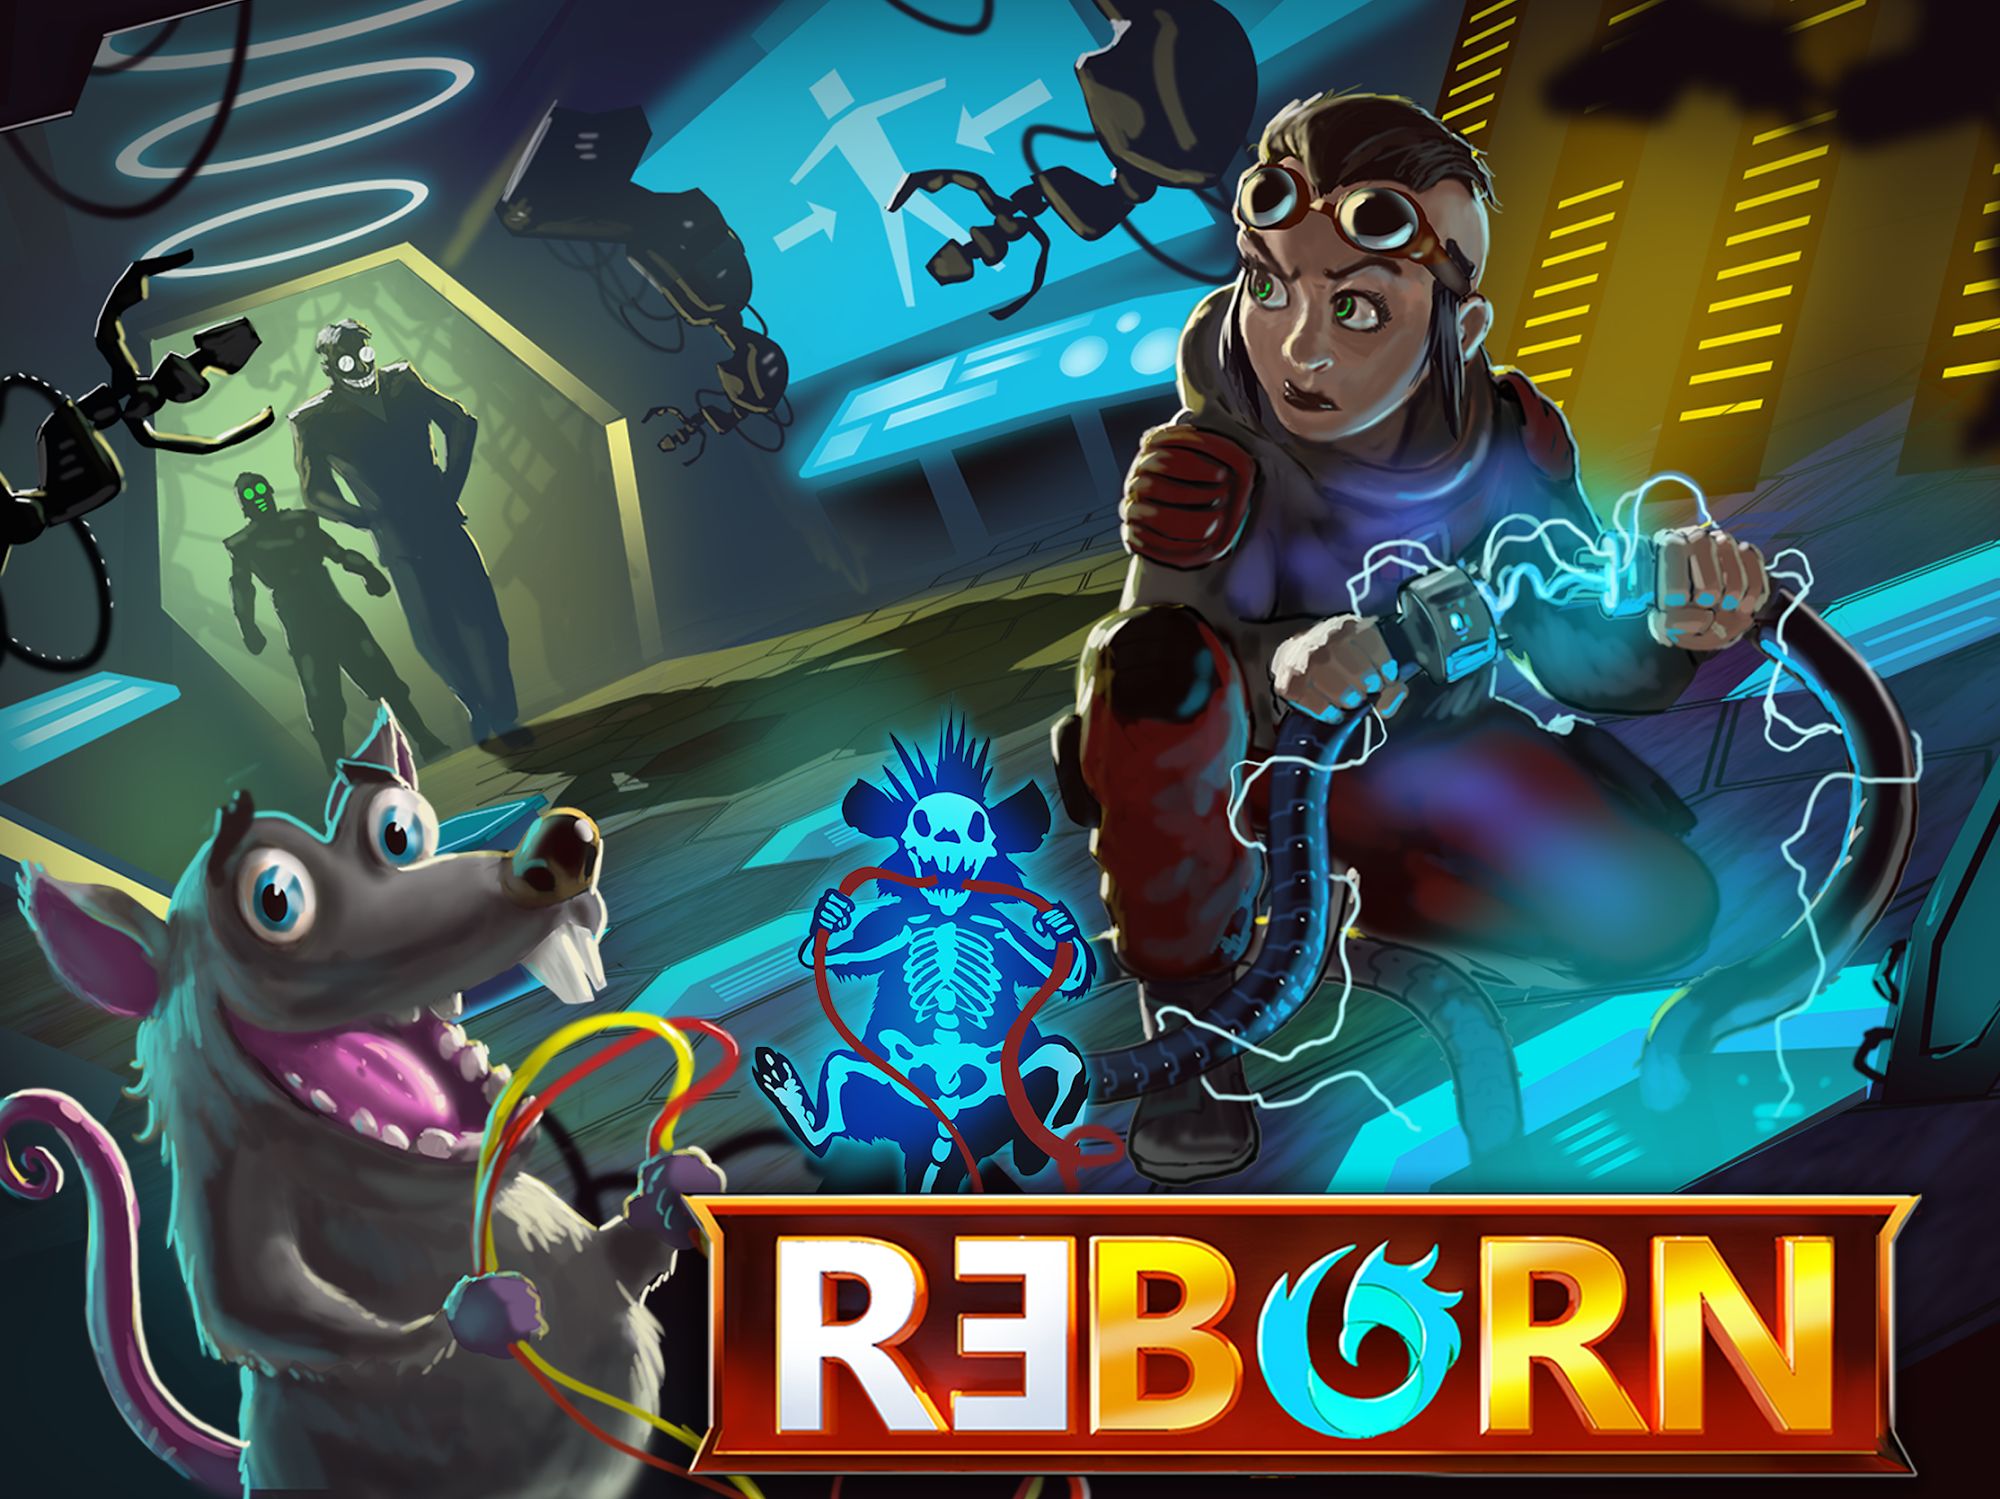 Full version of Android A.n.d.r.o.i.d. .5...0. .a.n.d. .m.o.r.e apk Adventure Reborn: story game point and click for tablet and phone.